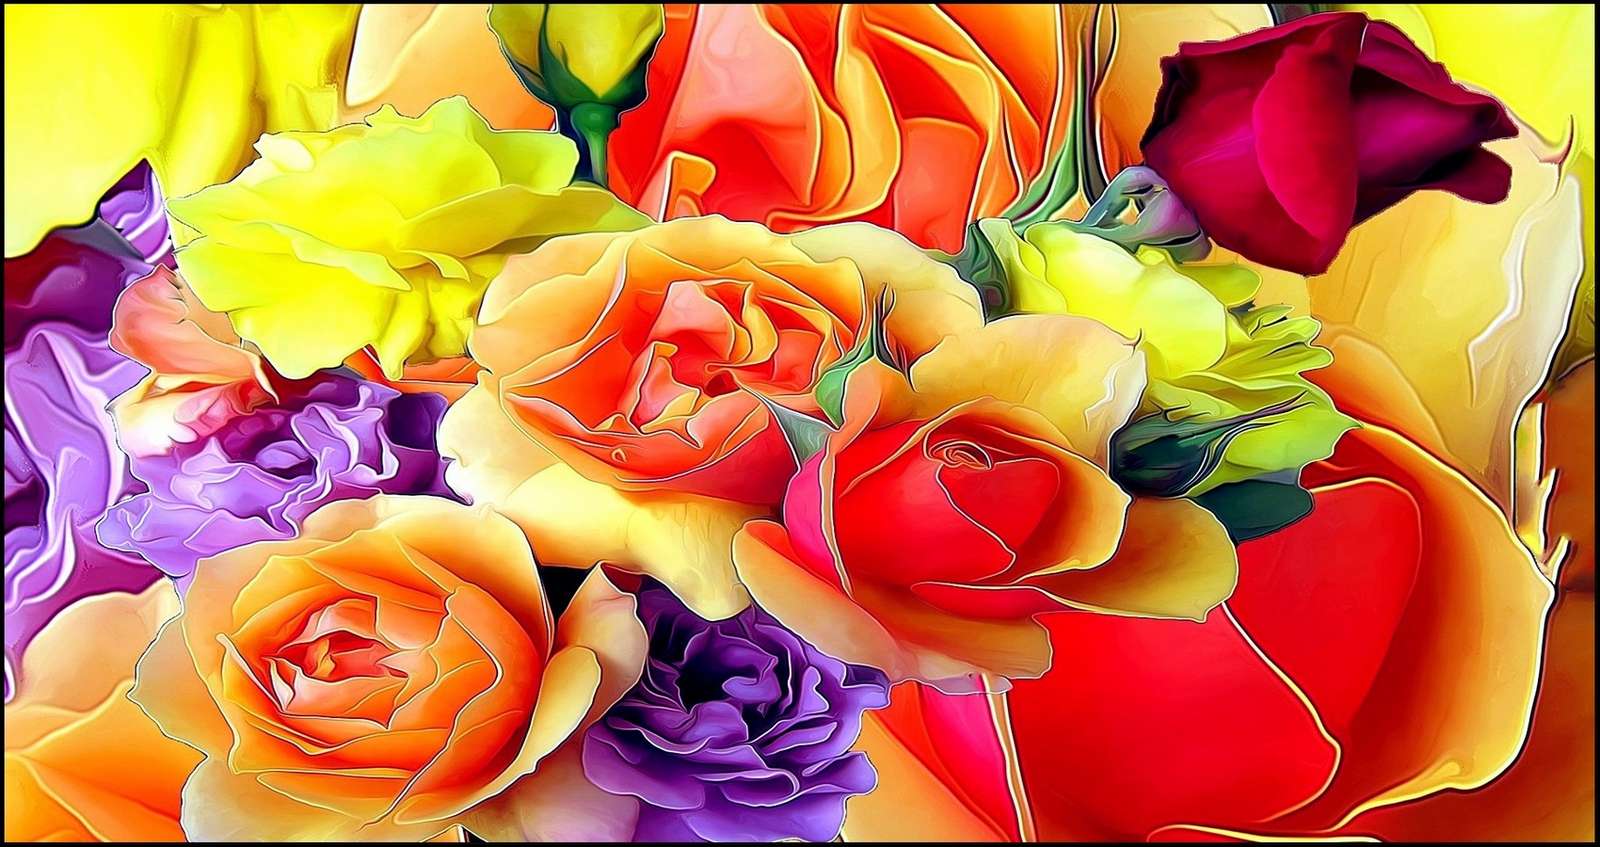 Roses, Colorful flowers online puzzle